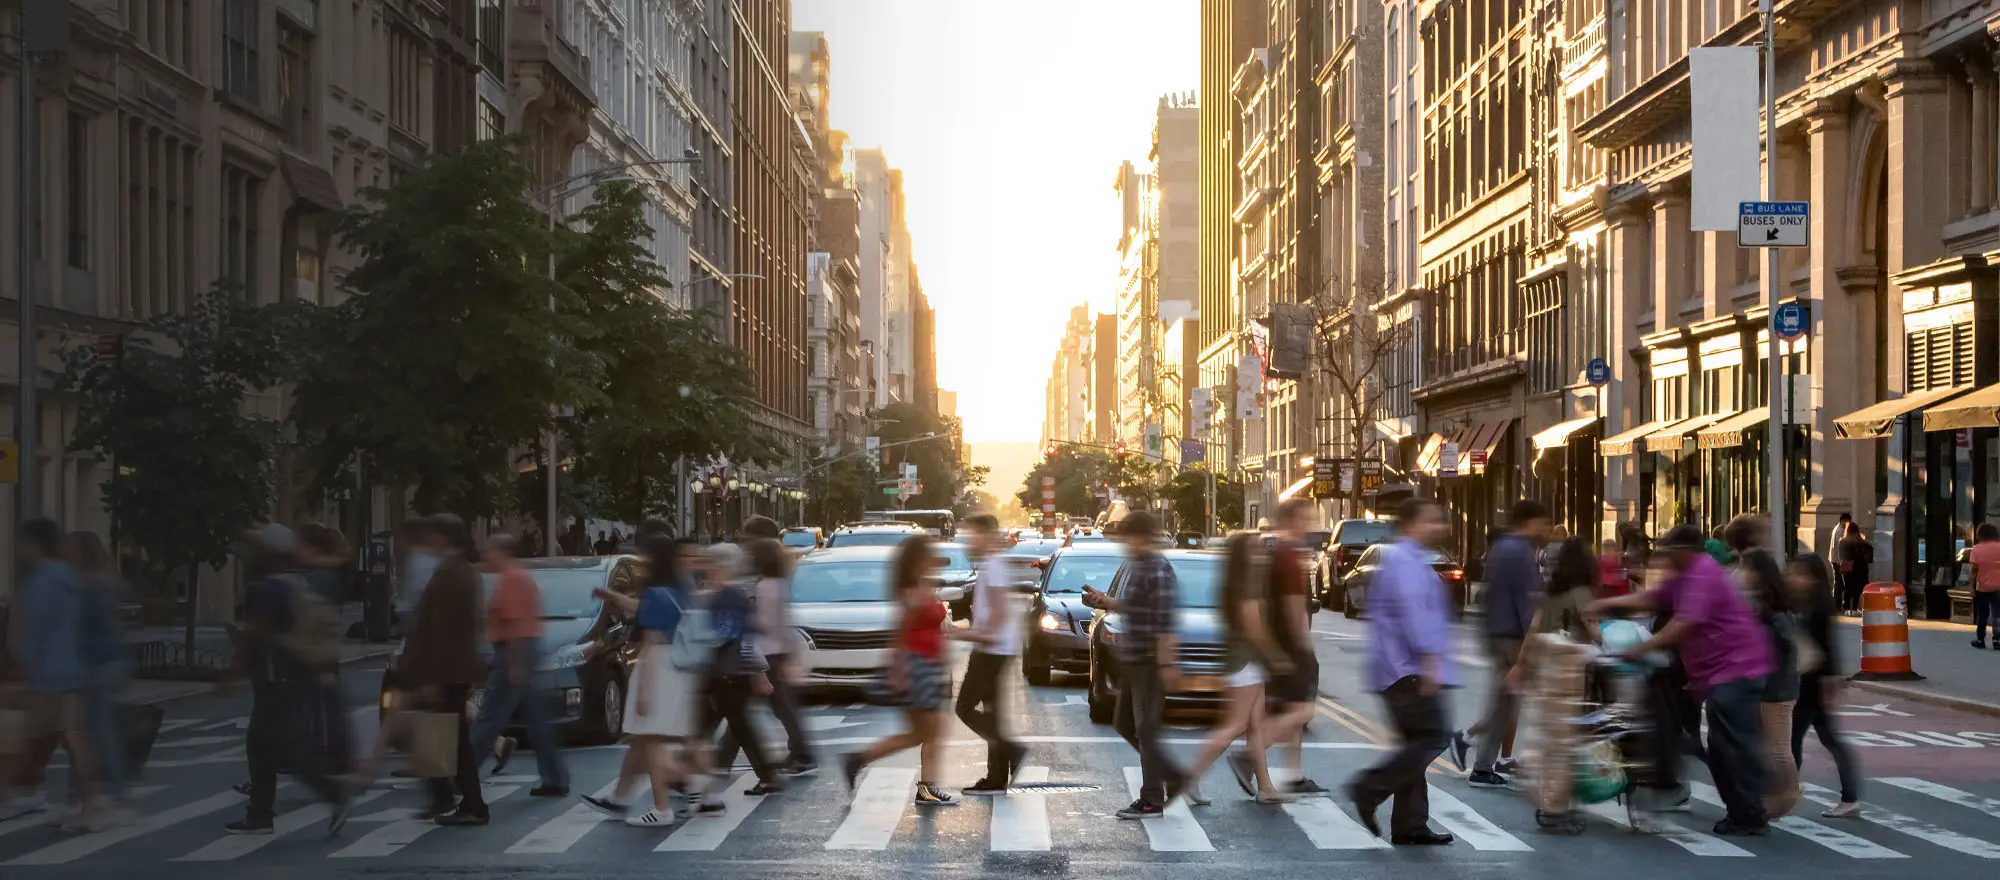 An image showing a vibrant community. A bright sunset in the background and people crossing a busy street at a crosswalk in the foreground.